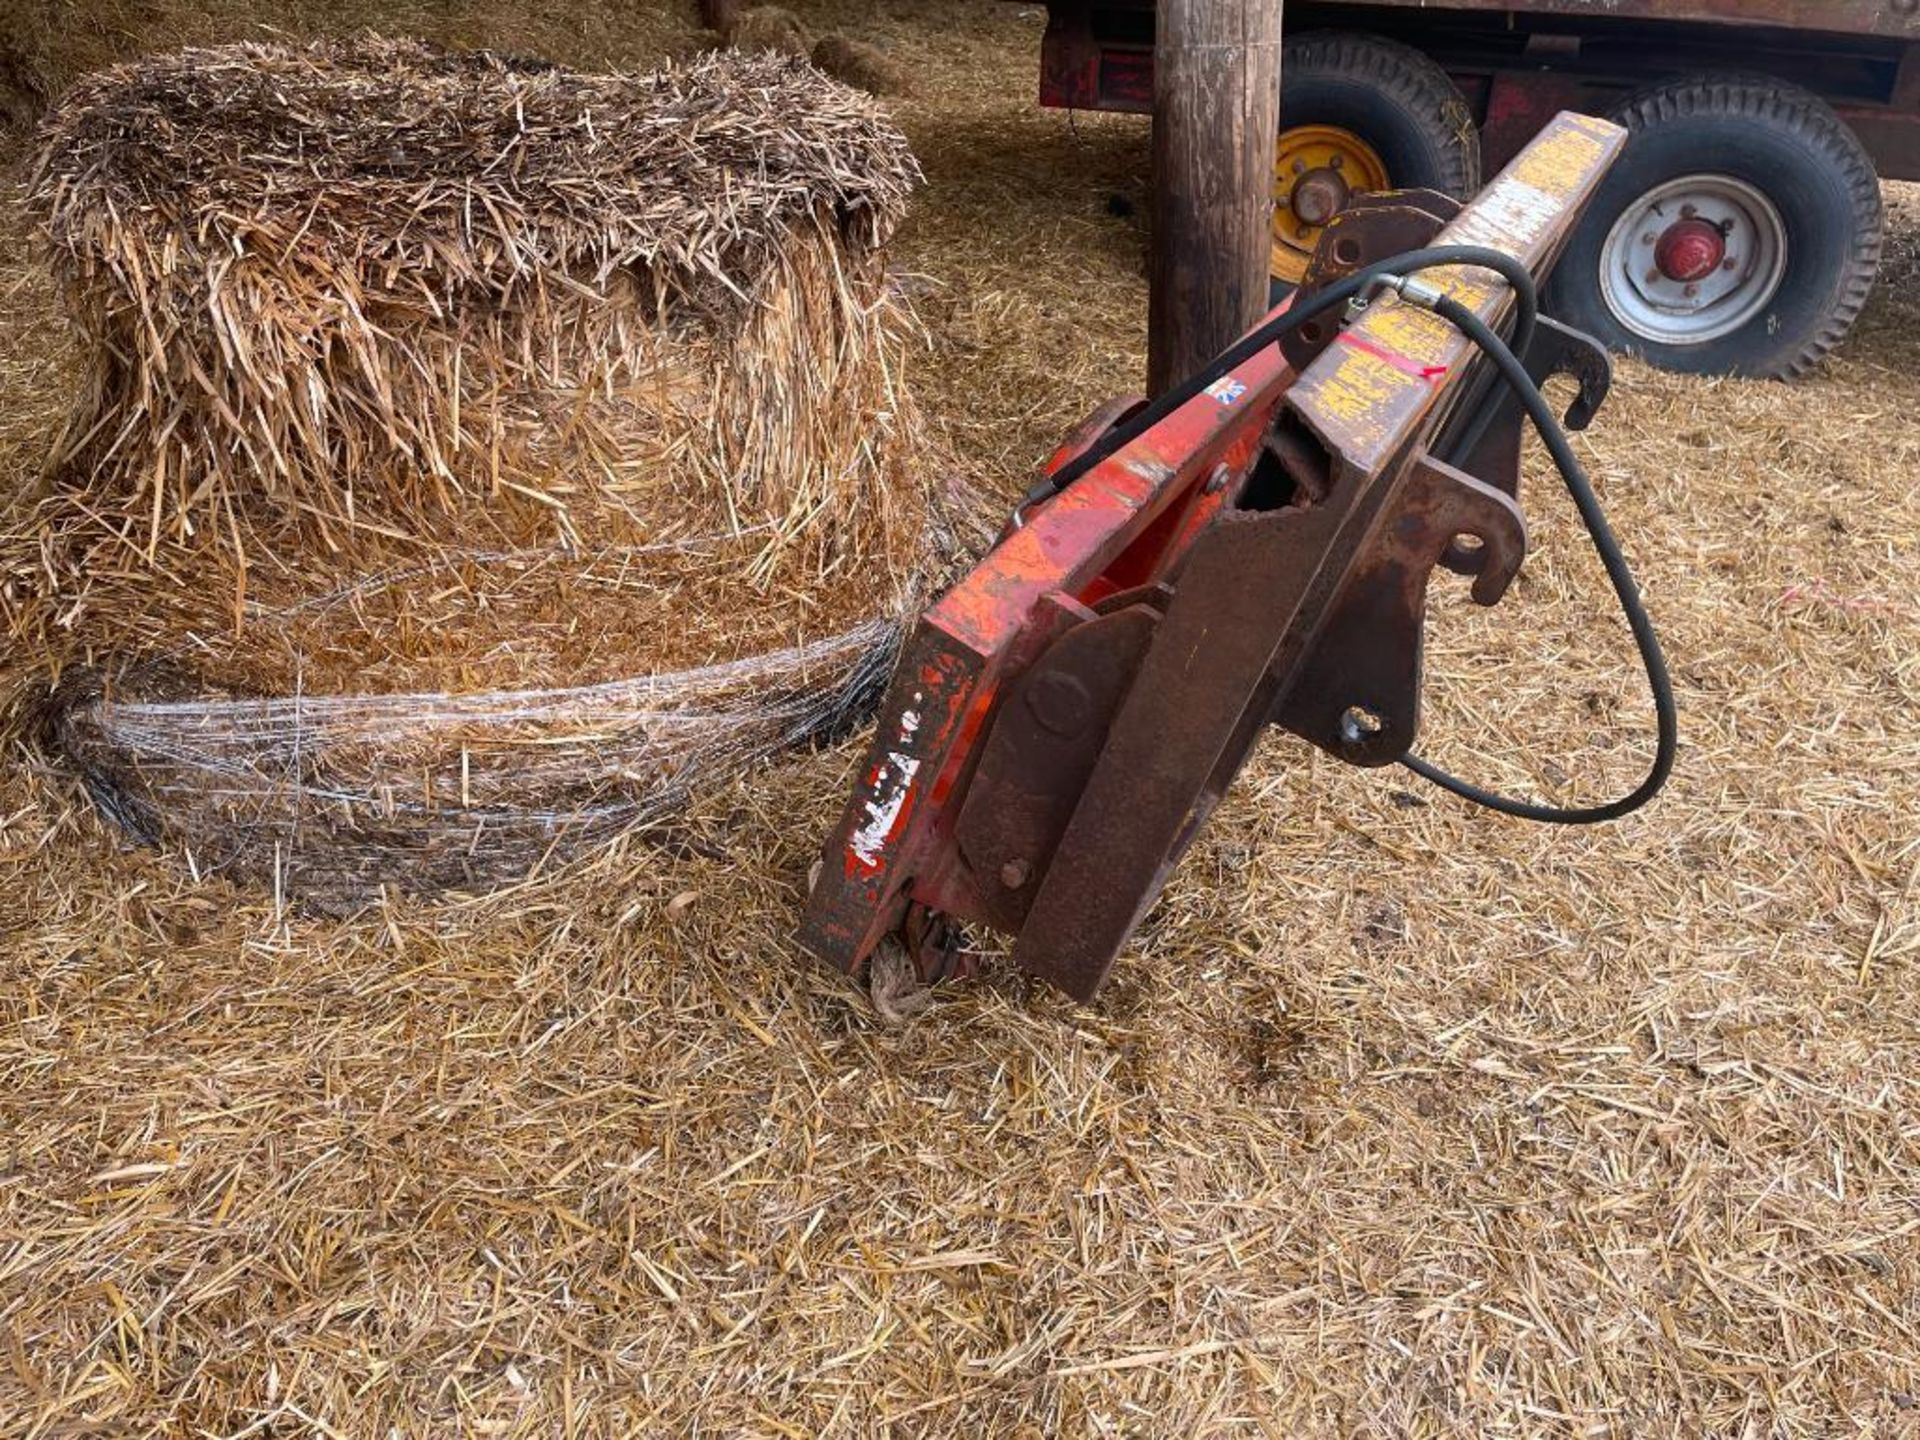 Browns hydraulic bale spike and squeeze with Euro 8 brackets and JCB Compact carriage adaptor